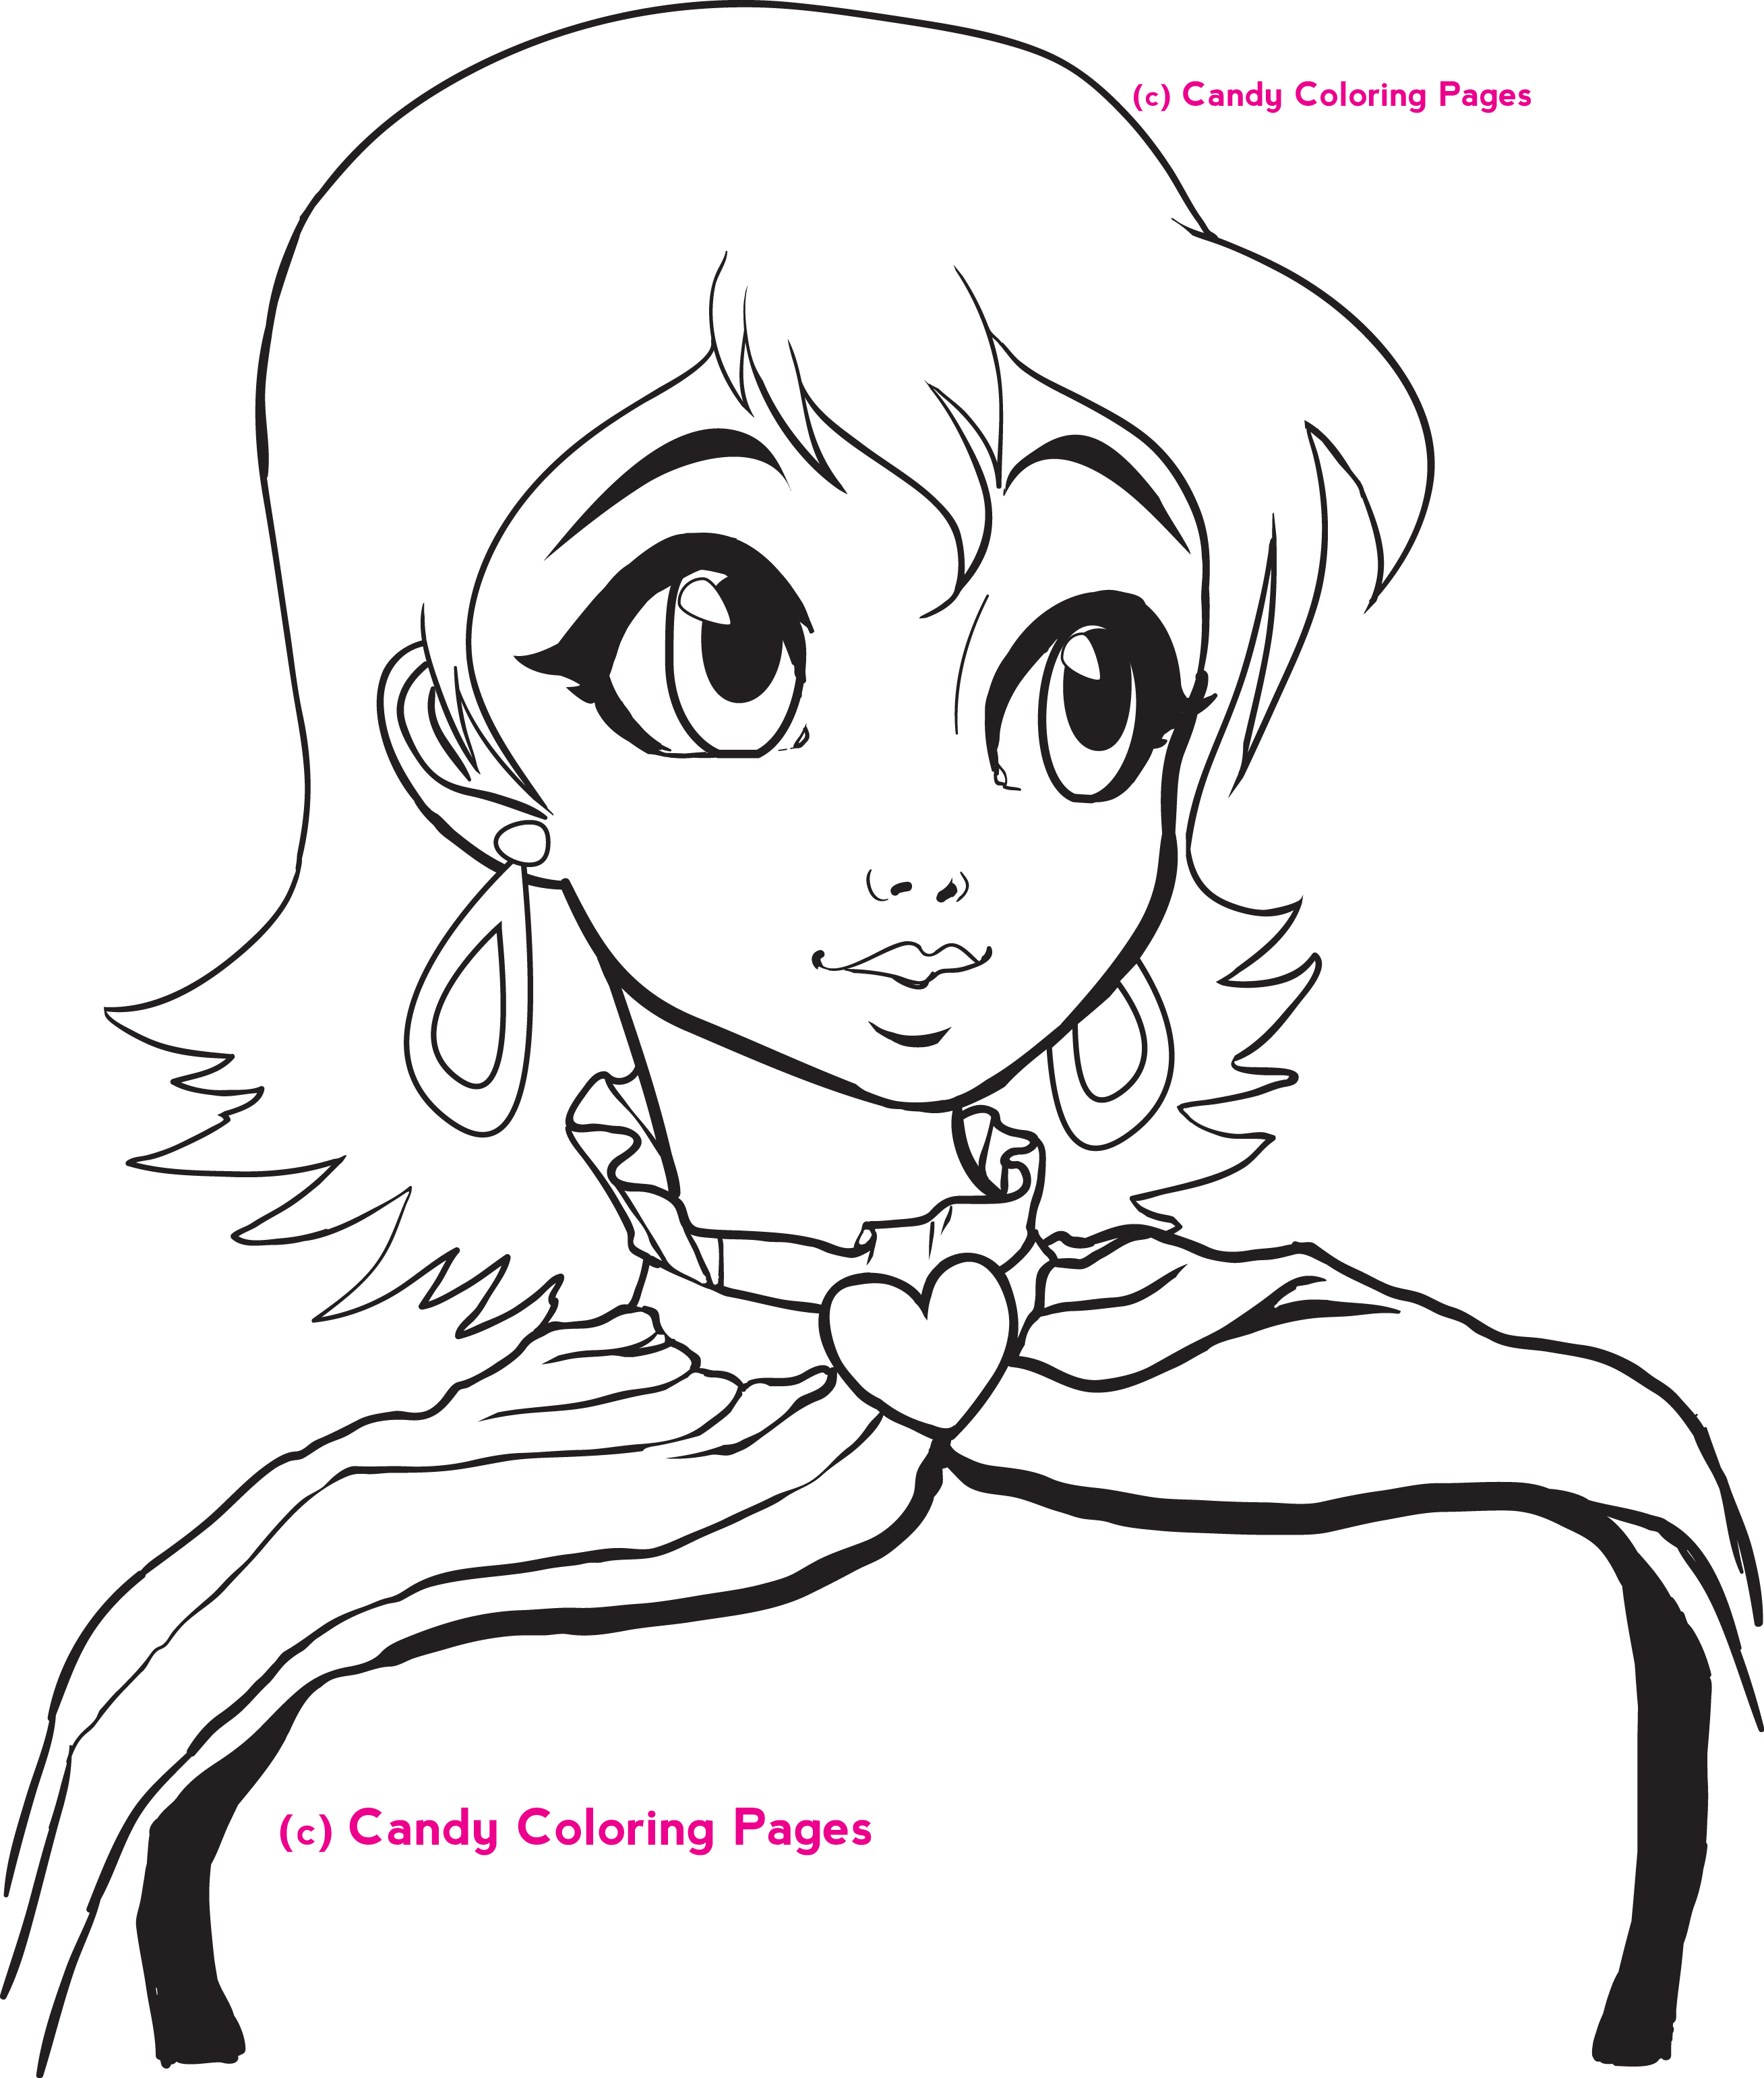 Princess Coloring Pages | Penny Candy Coloring Pages